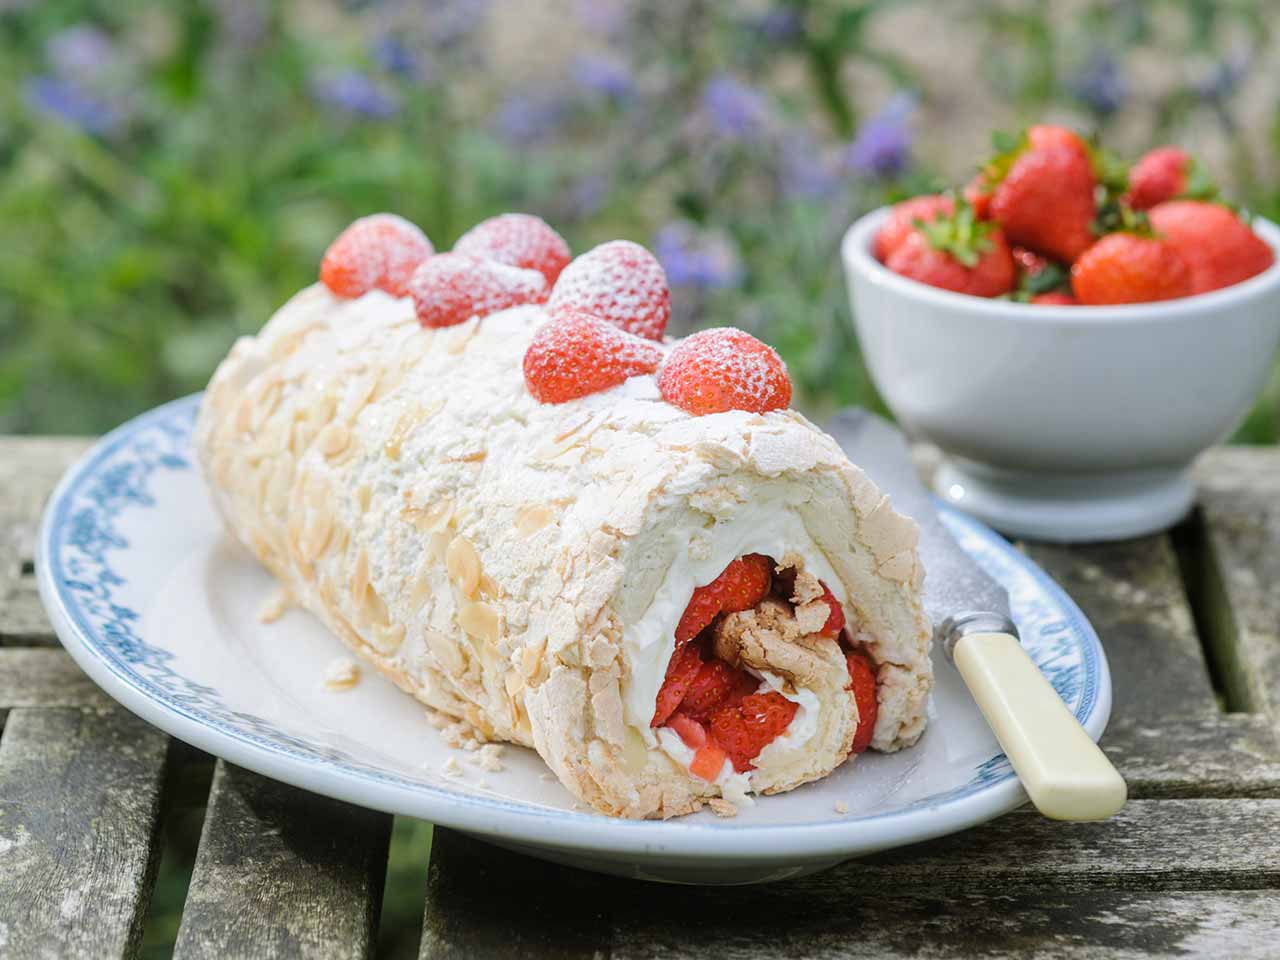 Strawberry meringue roulade with marscapone